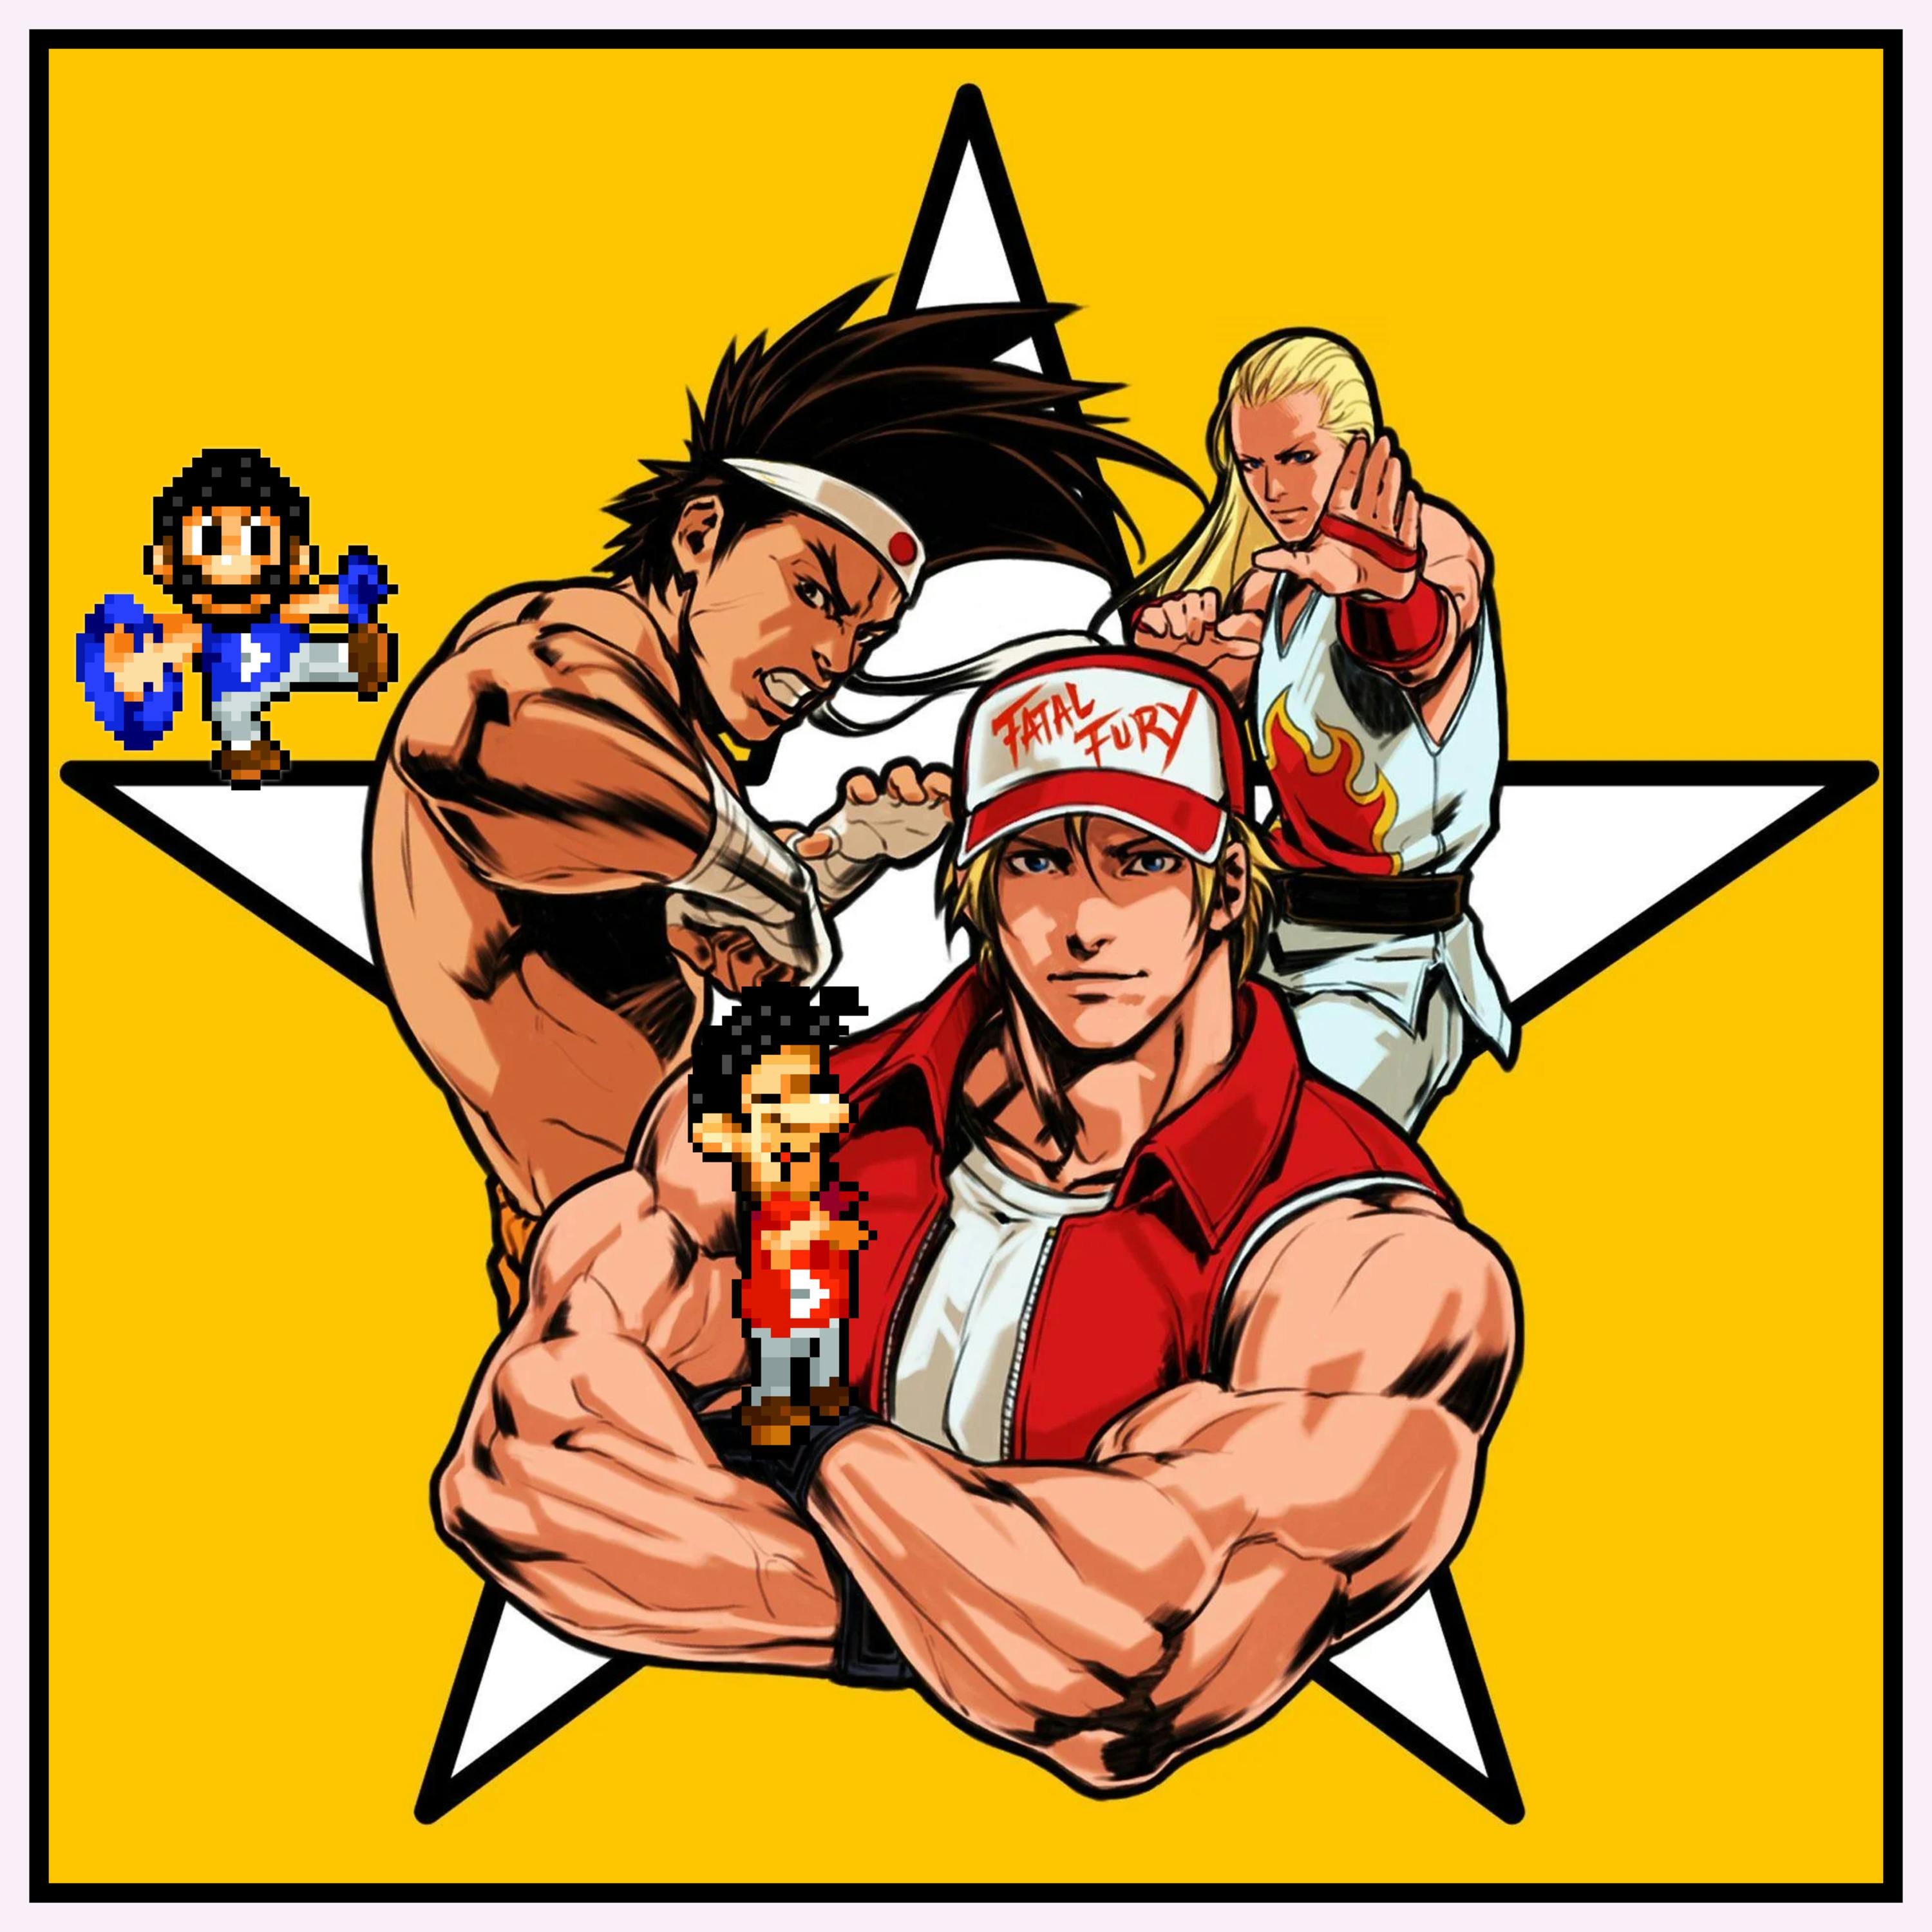 201 - Fatal Fury: King of Fighters